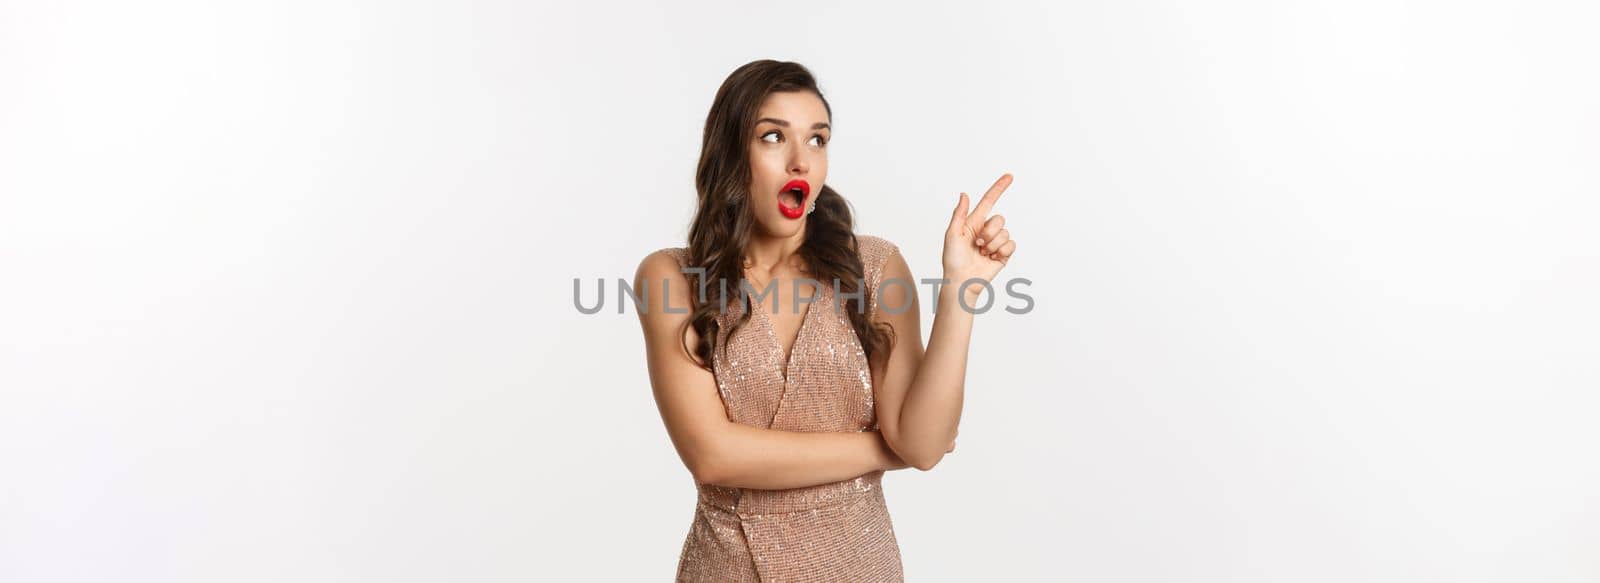 Christmas, holidays and celebration concept. Amazed fashionable woman in party dress and red lipstick, pointing and looking left at promo offer, standing against white background.